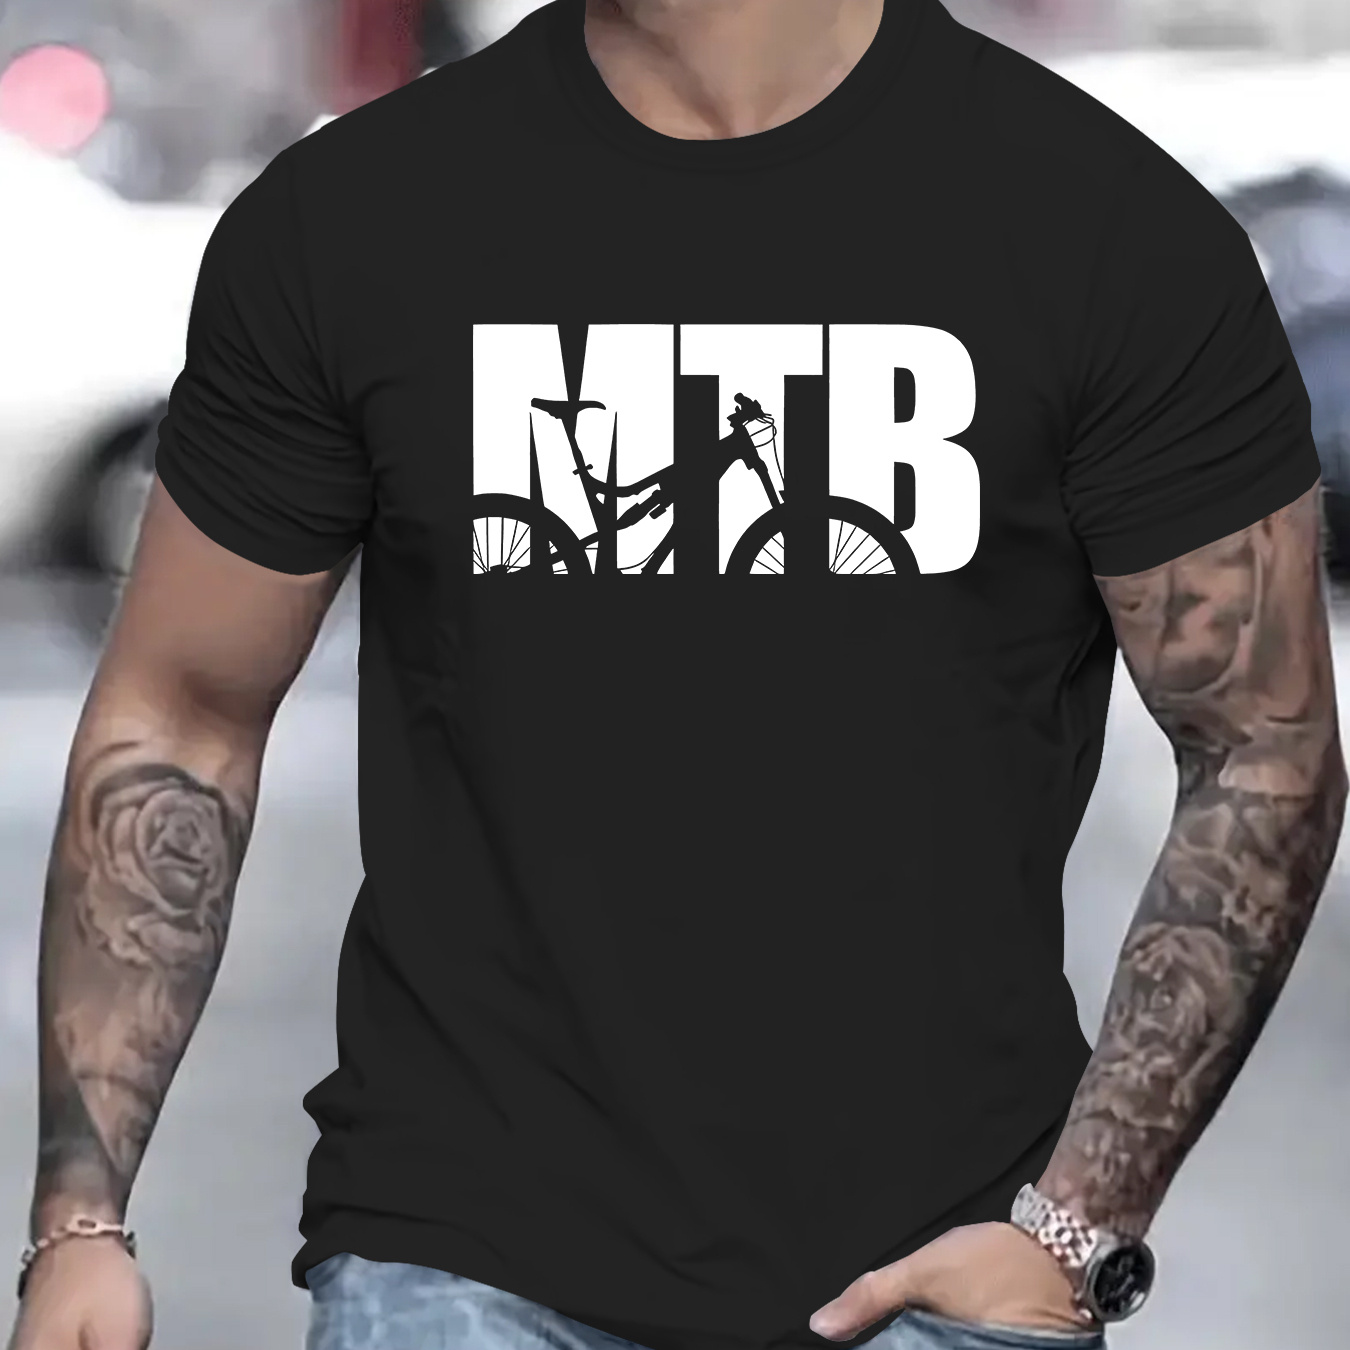 

Mtb Print, Men's Round Crew Neck Short Sleeve, Simple Style Tee Fashion Regular Fit T-shirt, Casual Comfy Breathable Top For Spring Summer Holiday Leisure Vacation Men's Clothing As Gift